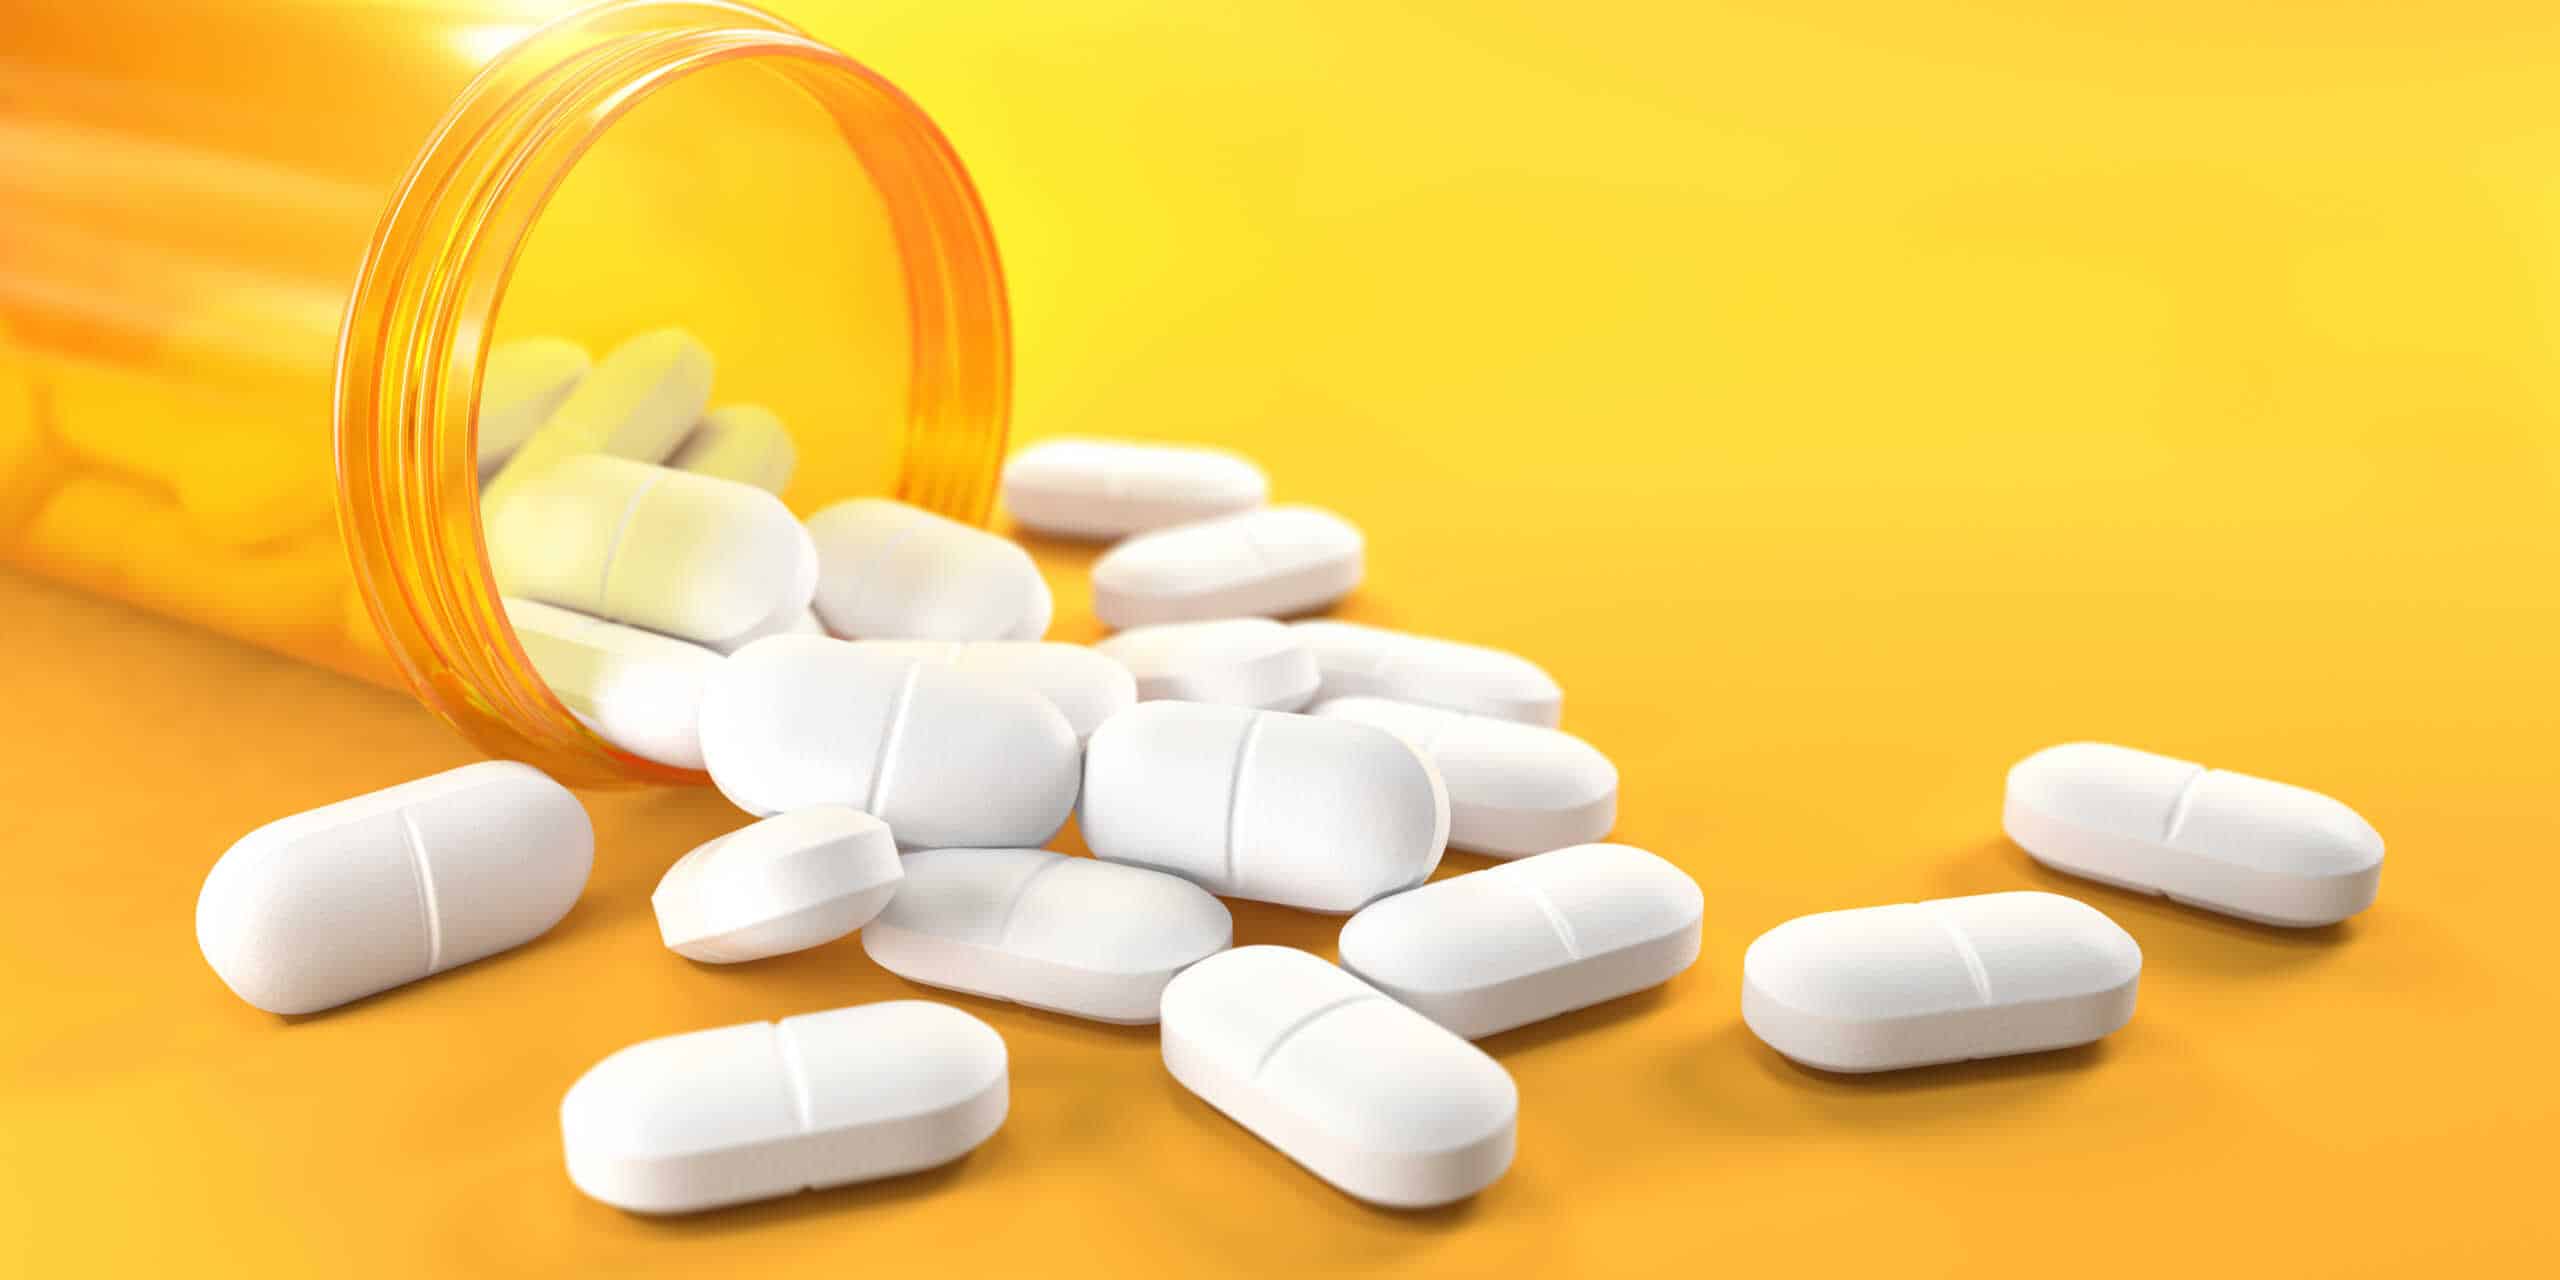 Can You Take Muscle Relaxers And Ibuprofen Together?